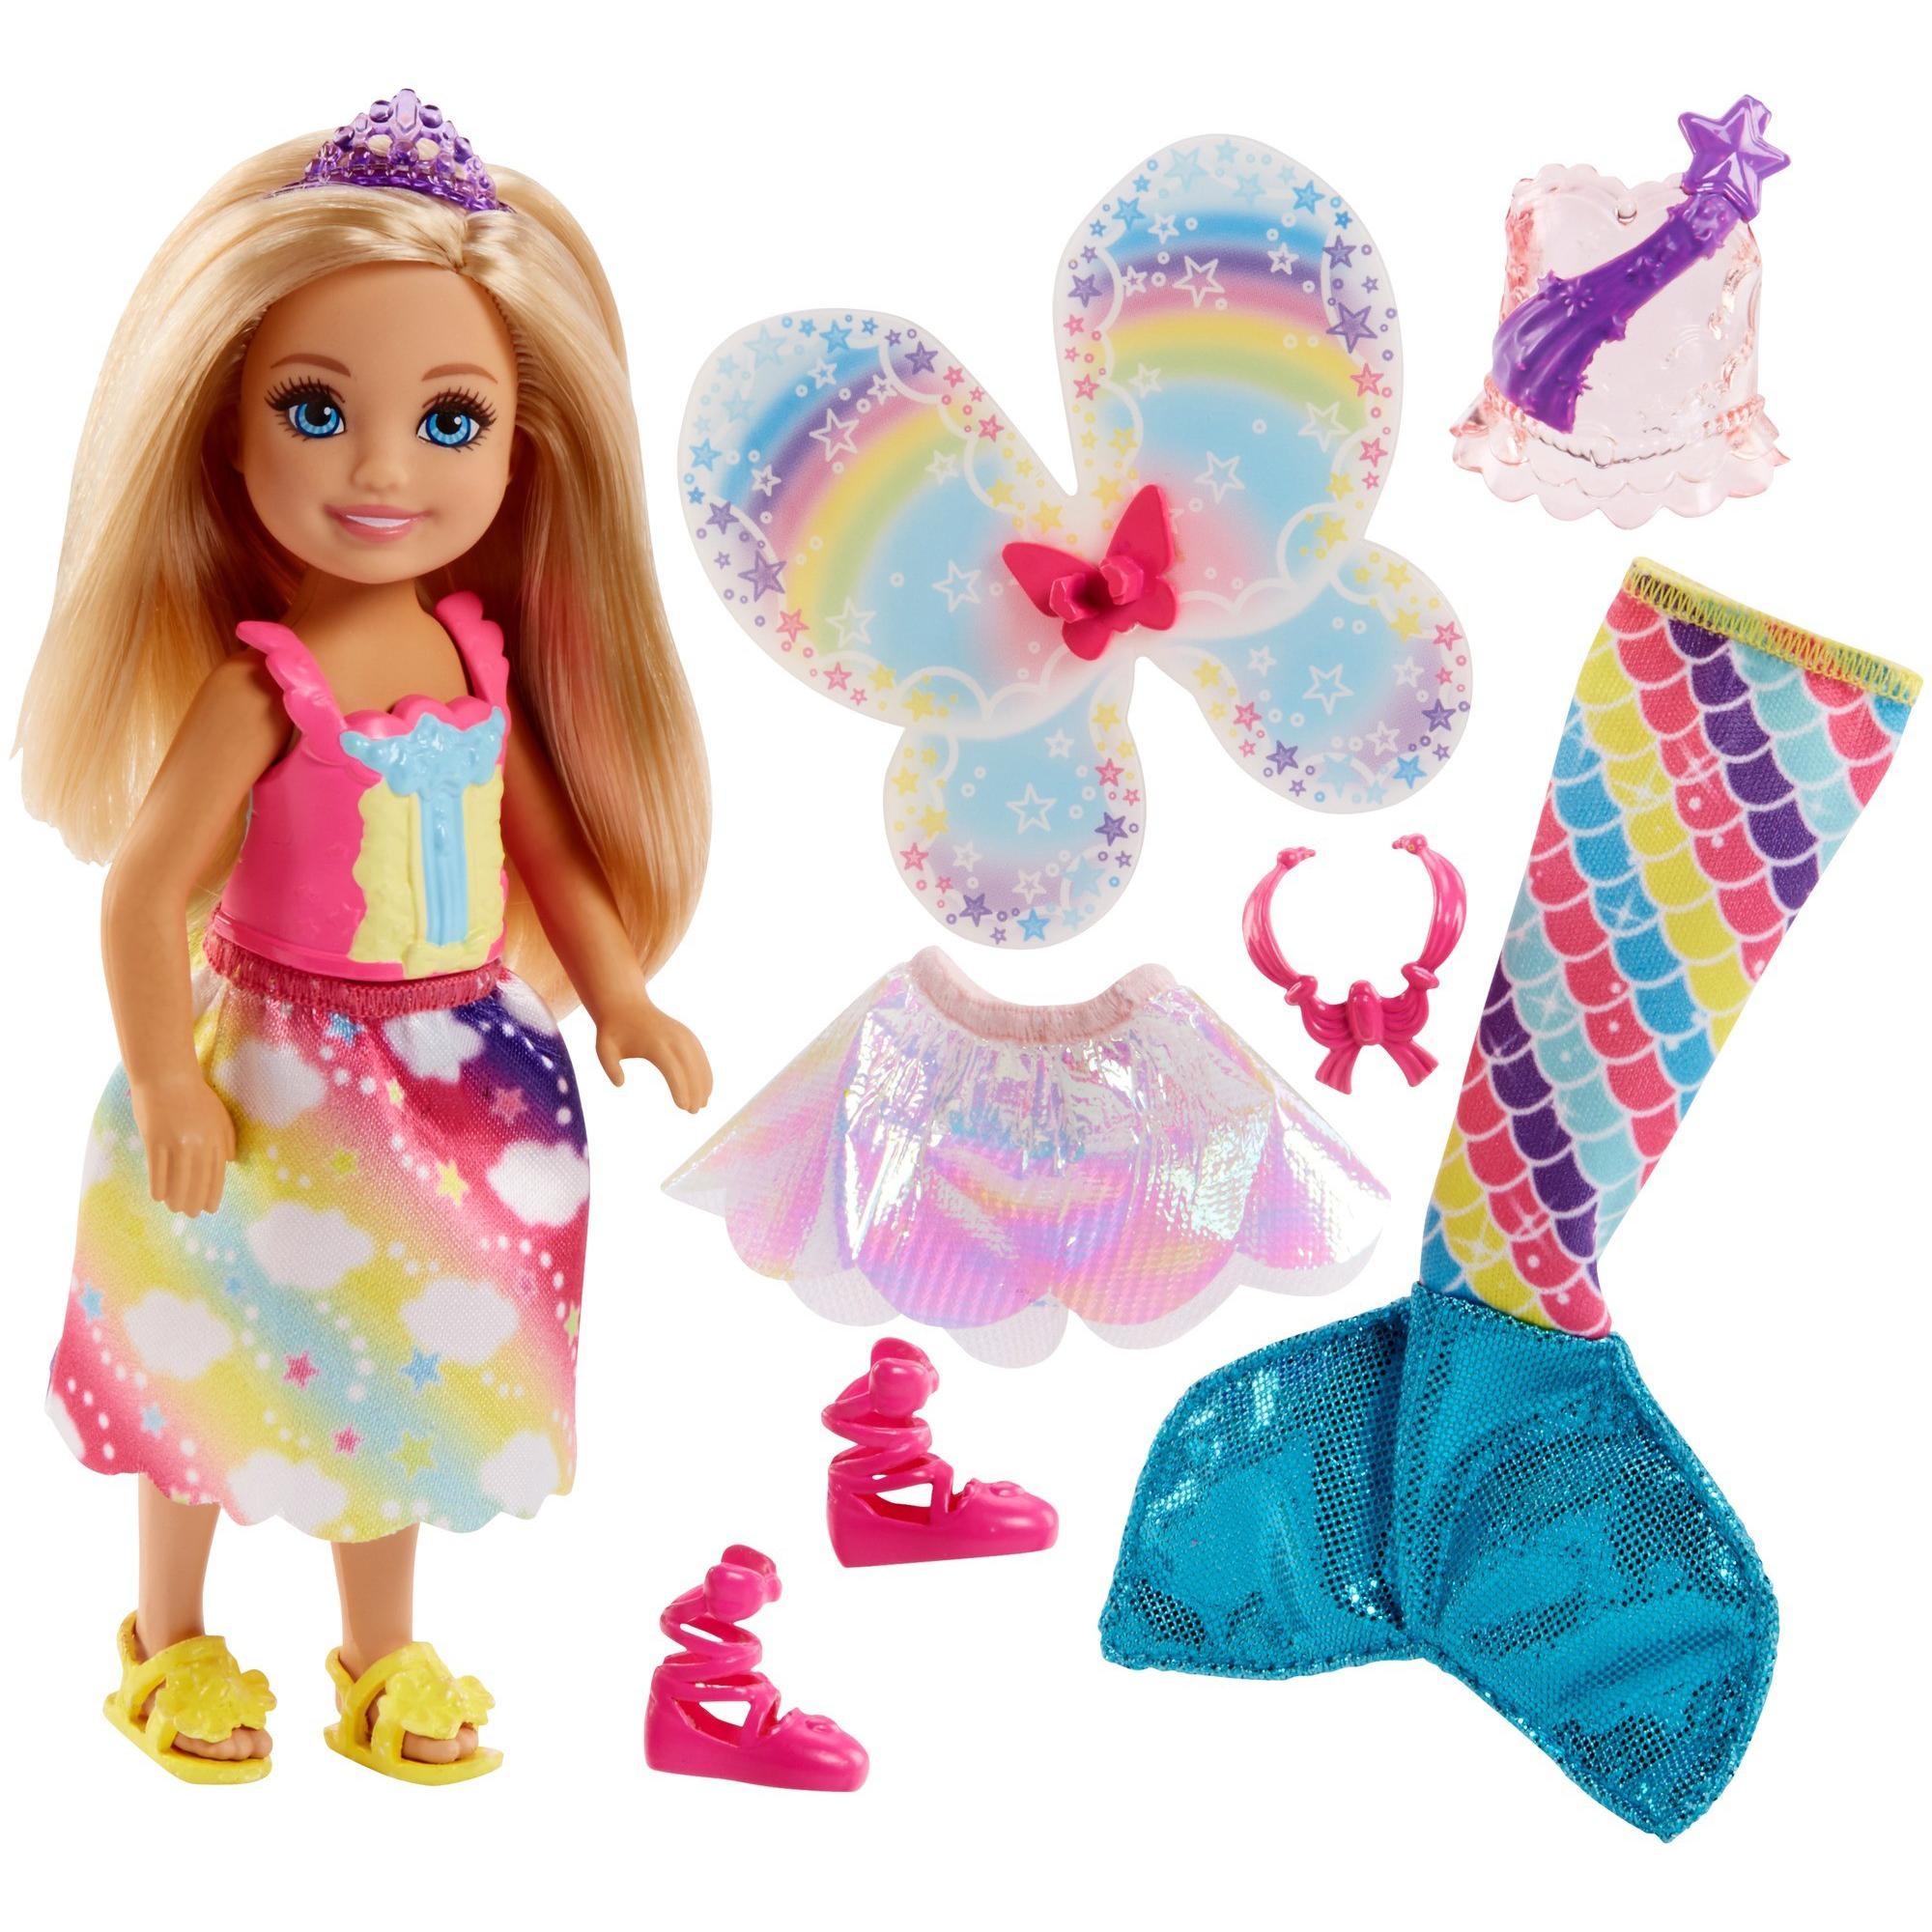 Barbie Rainbow Cove Chelsea Dress Up Doll with 3-Themed Outfits - image 1 of 9